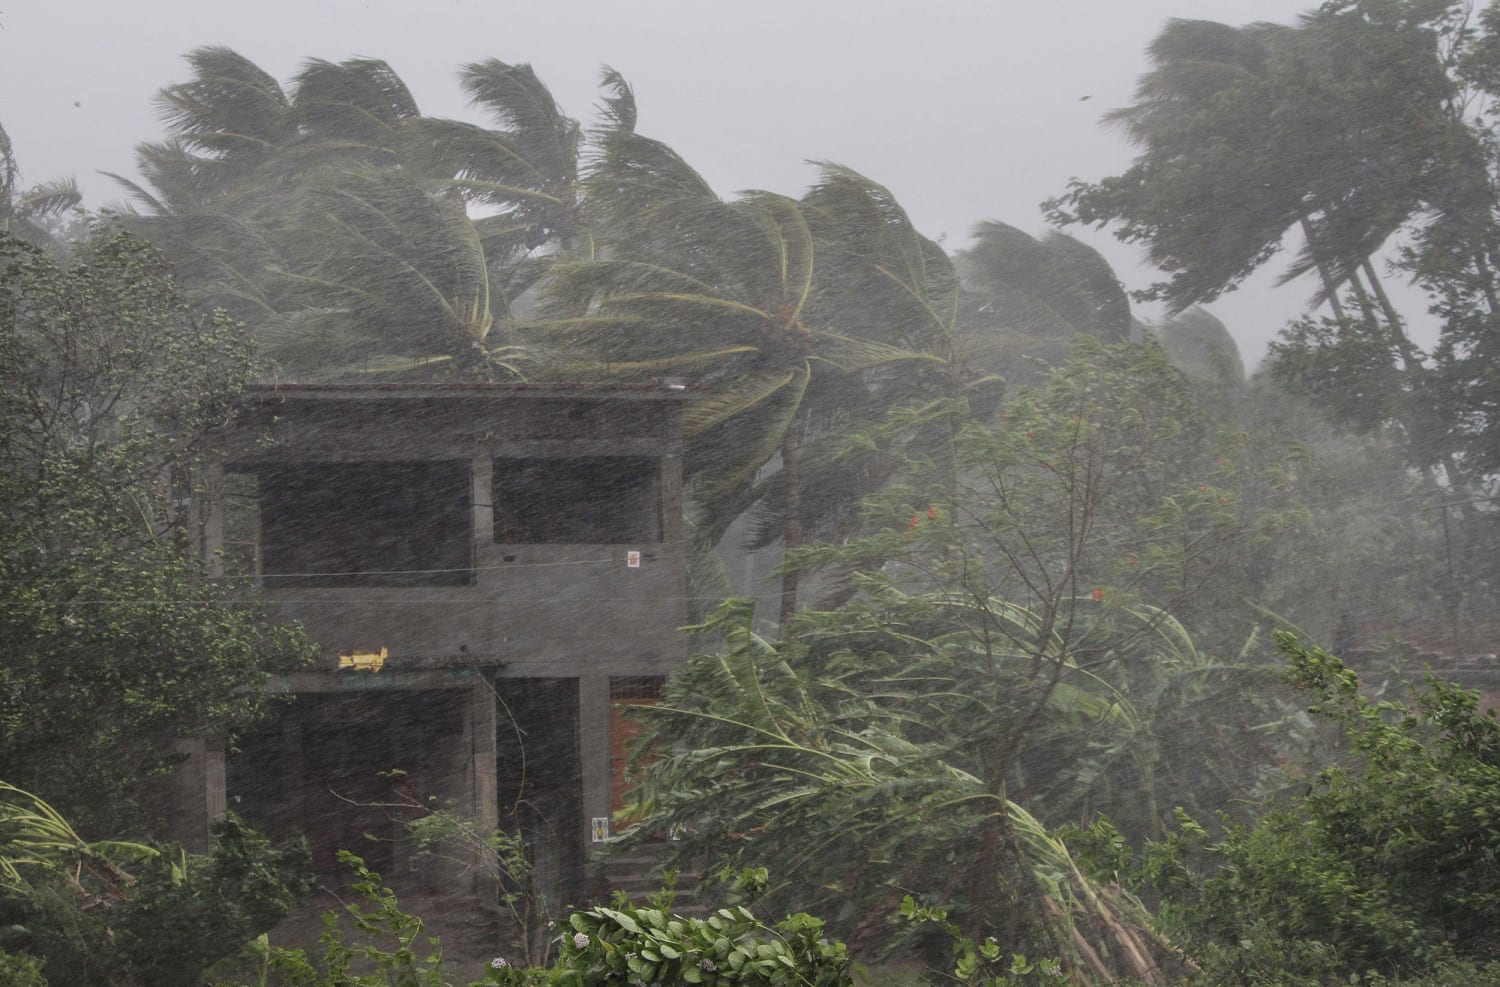 Cyclone Fani hits coast of eastern India with 124 mph gusts